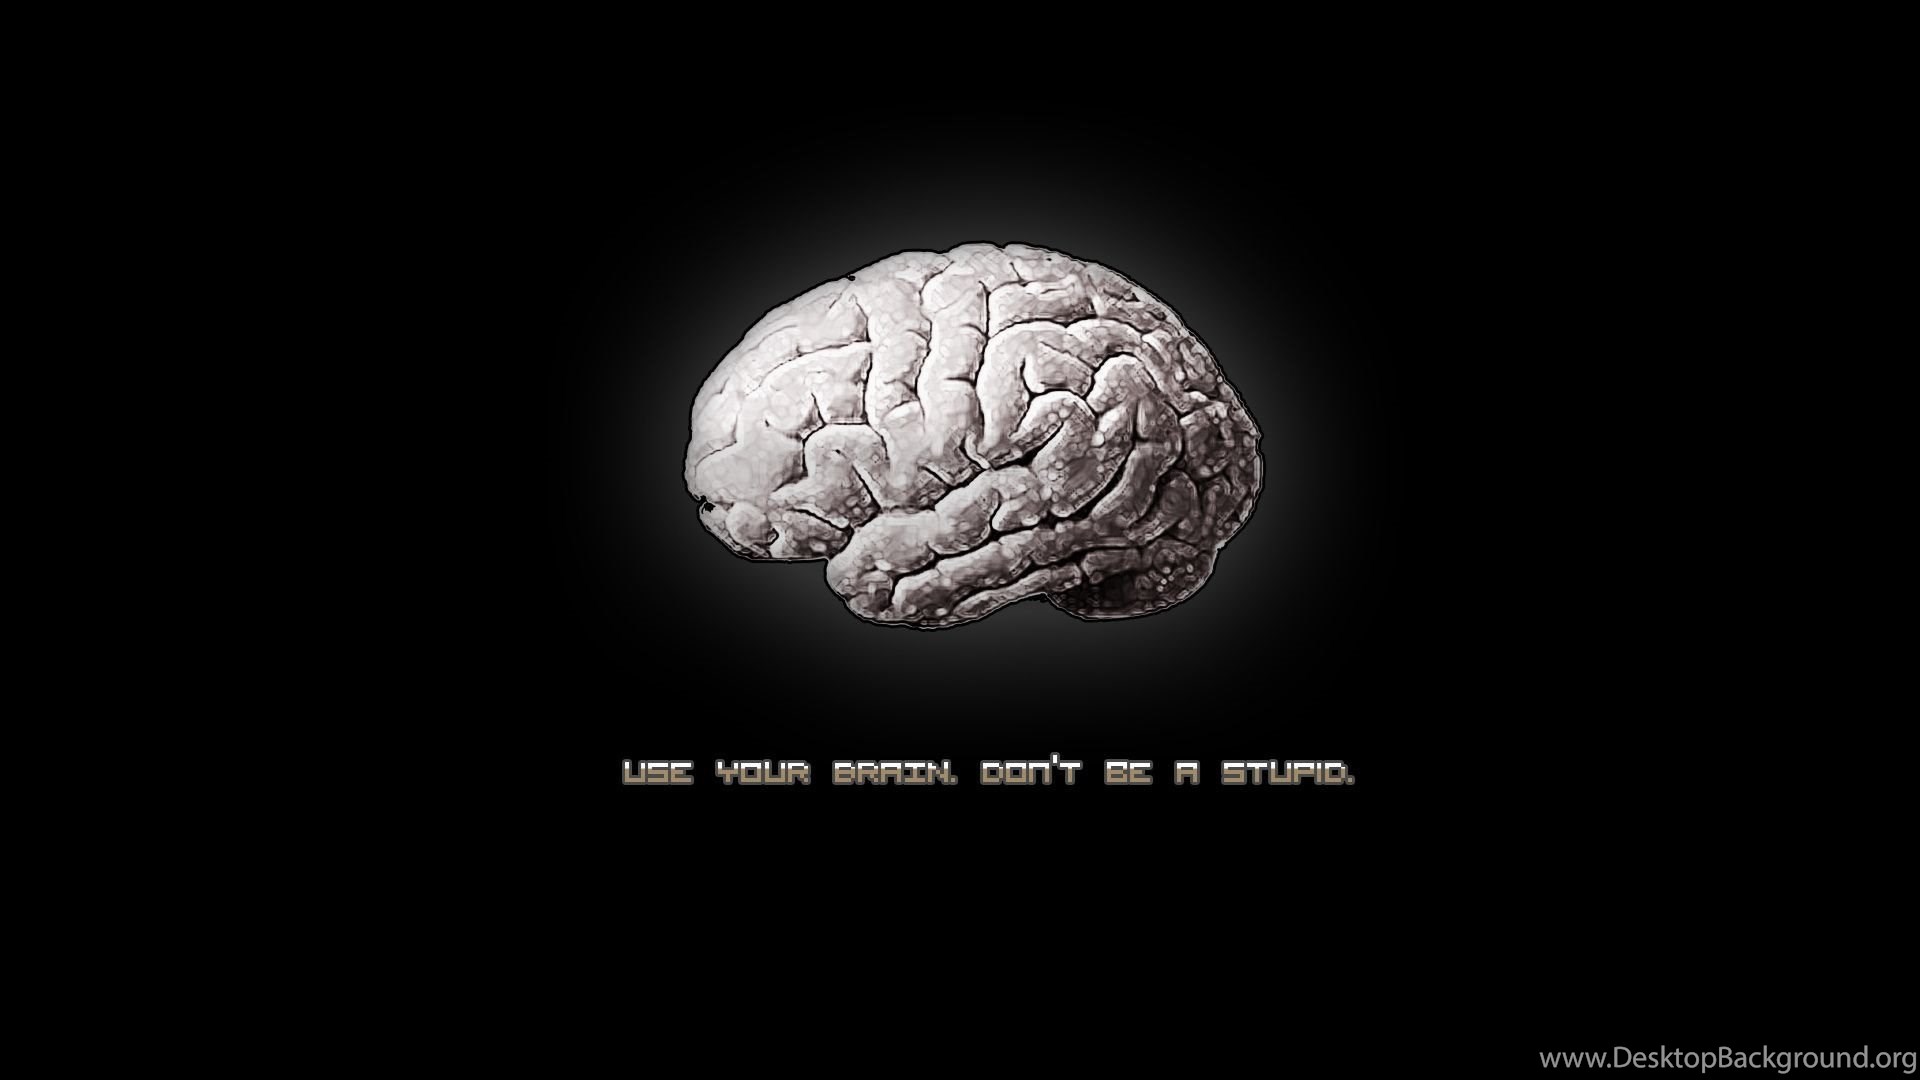 Use Your Brain Wallpapers And Images Wallpapers, Pictures, Photos ...